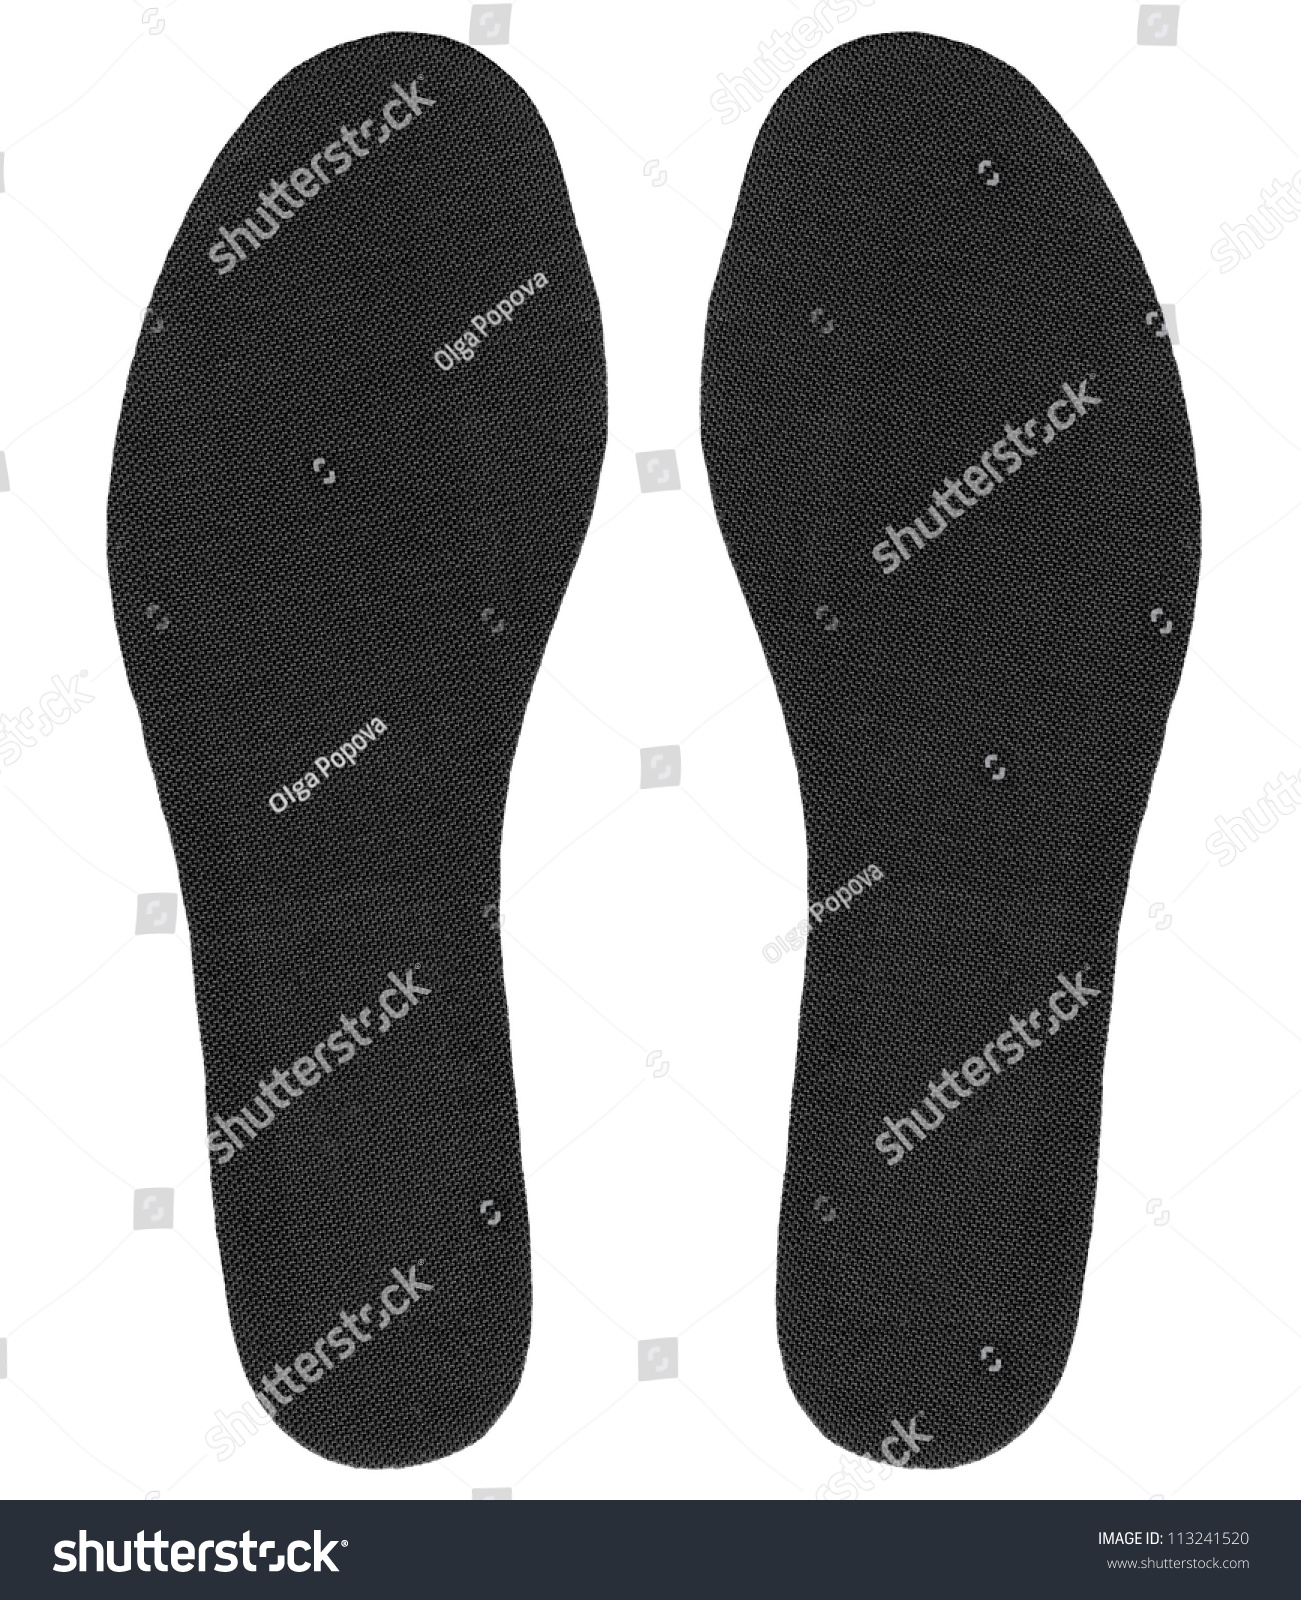 new insoles